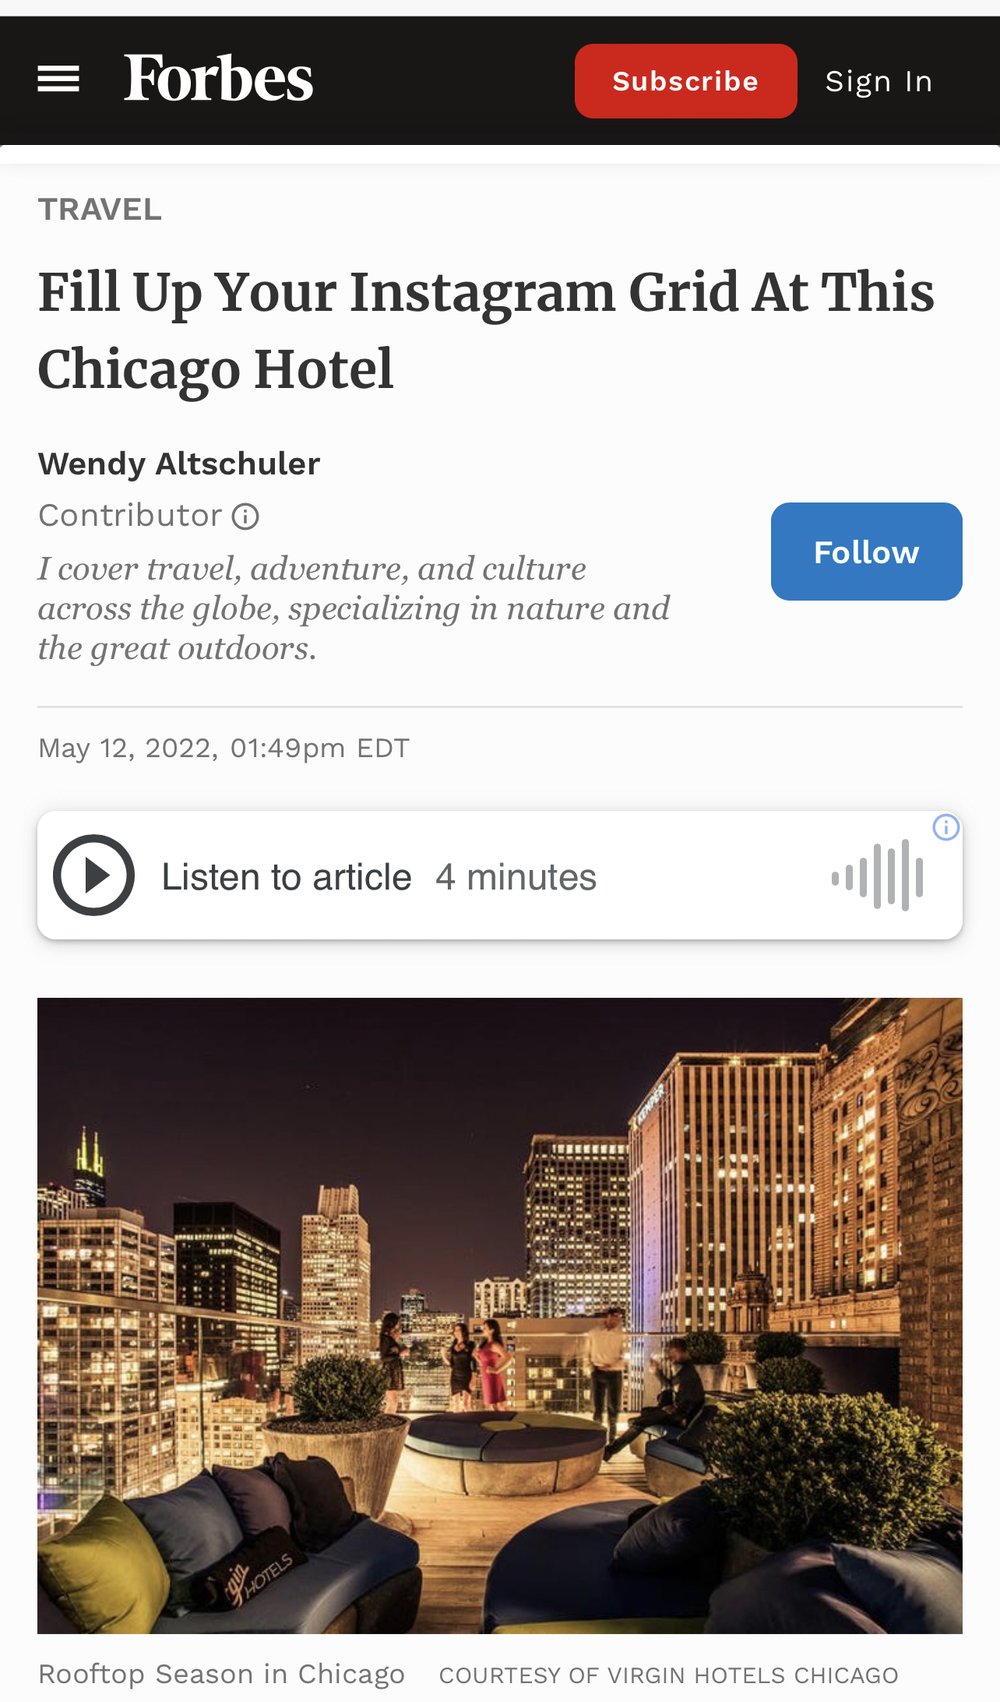 Fill Up Your Instagram Grid At This Chicago Hotel